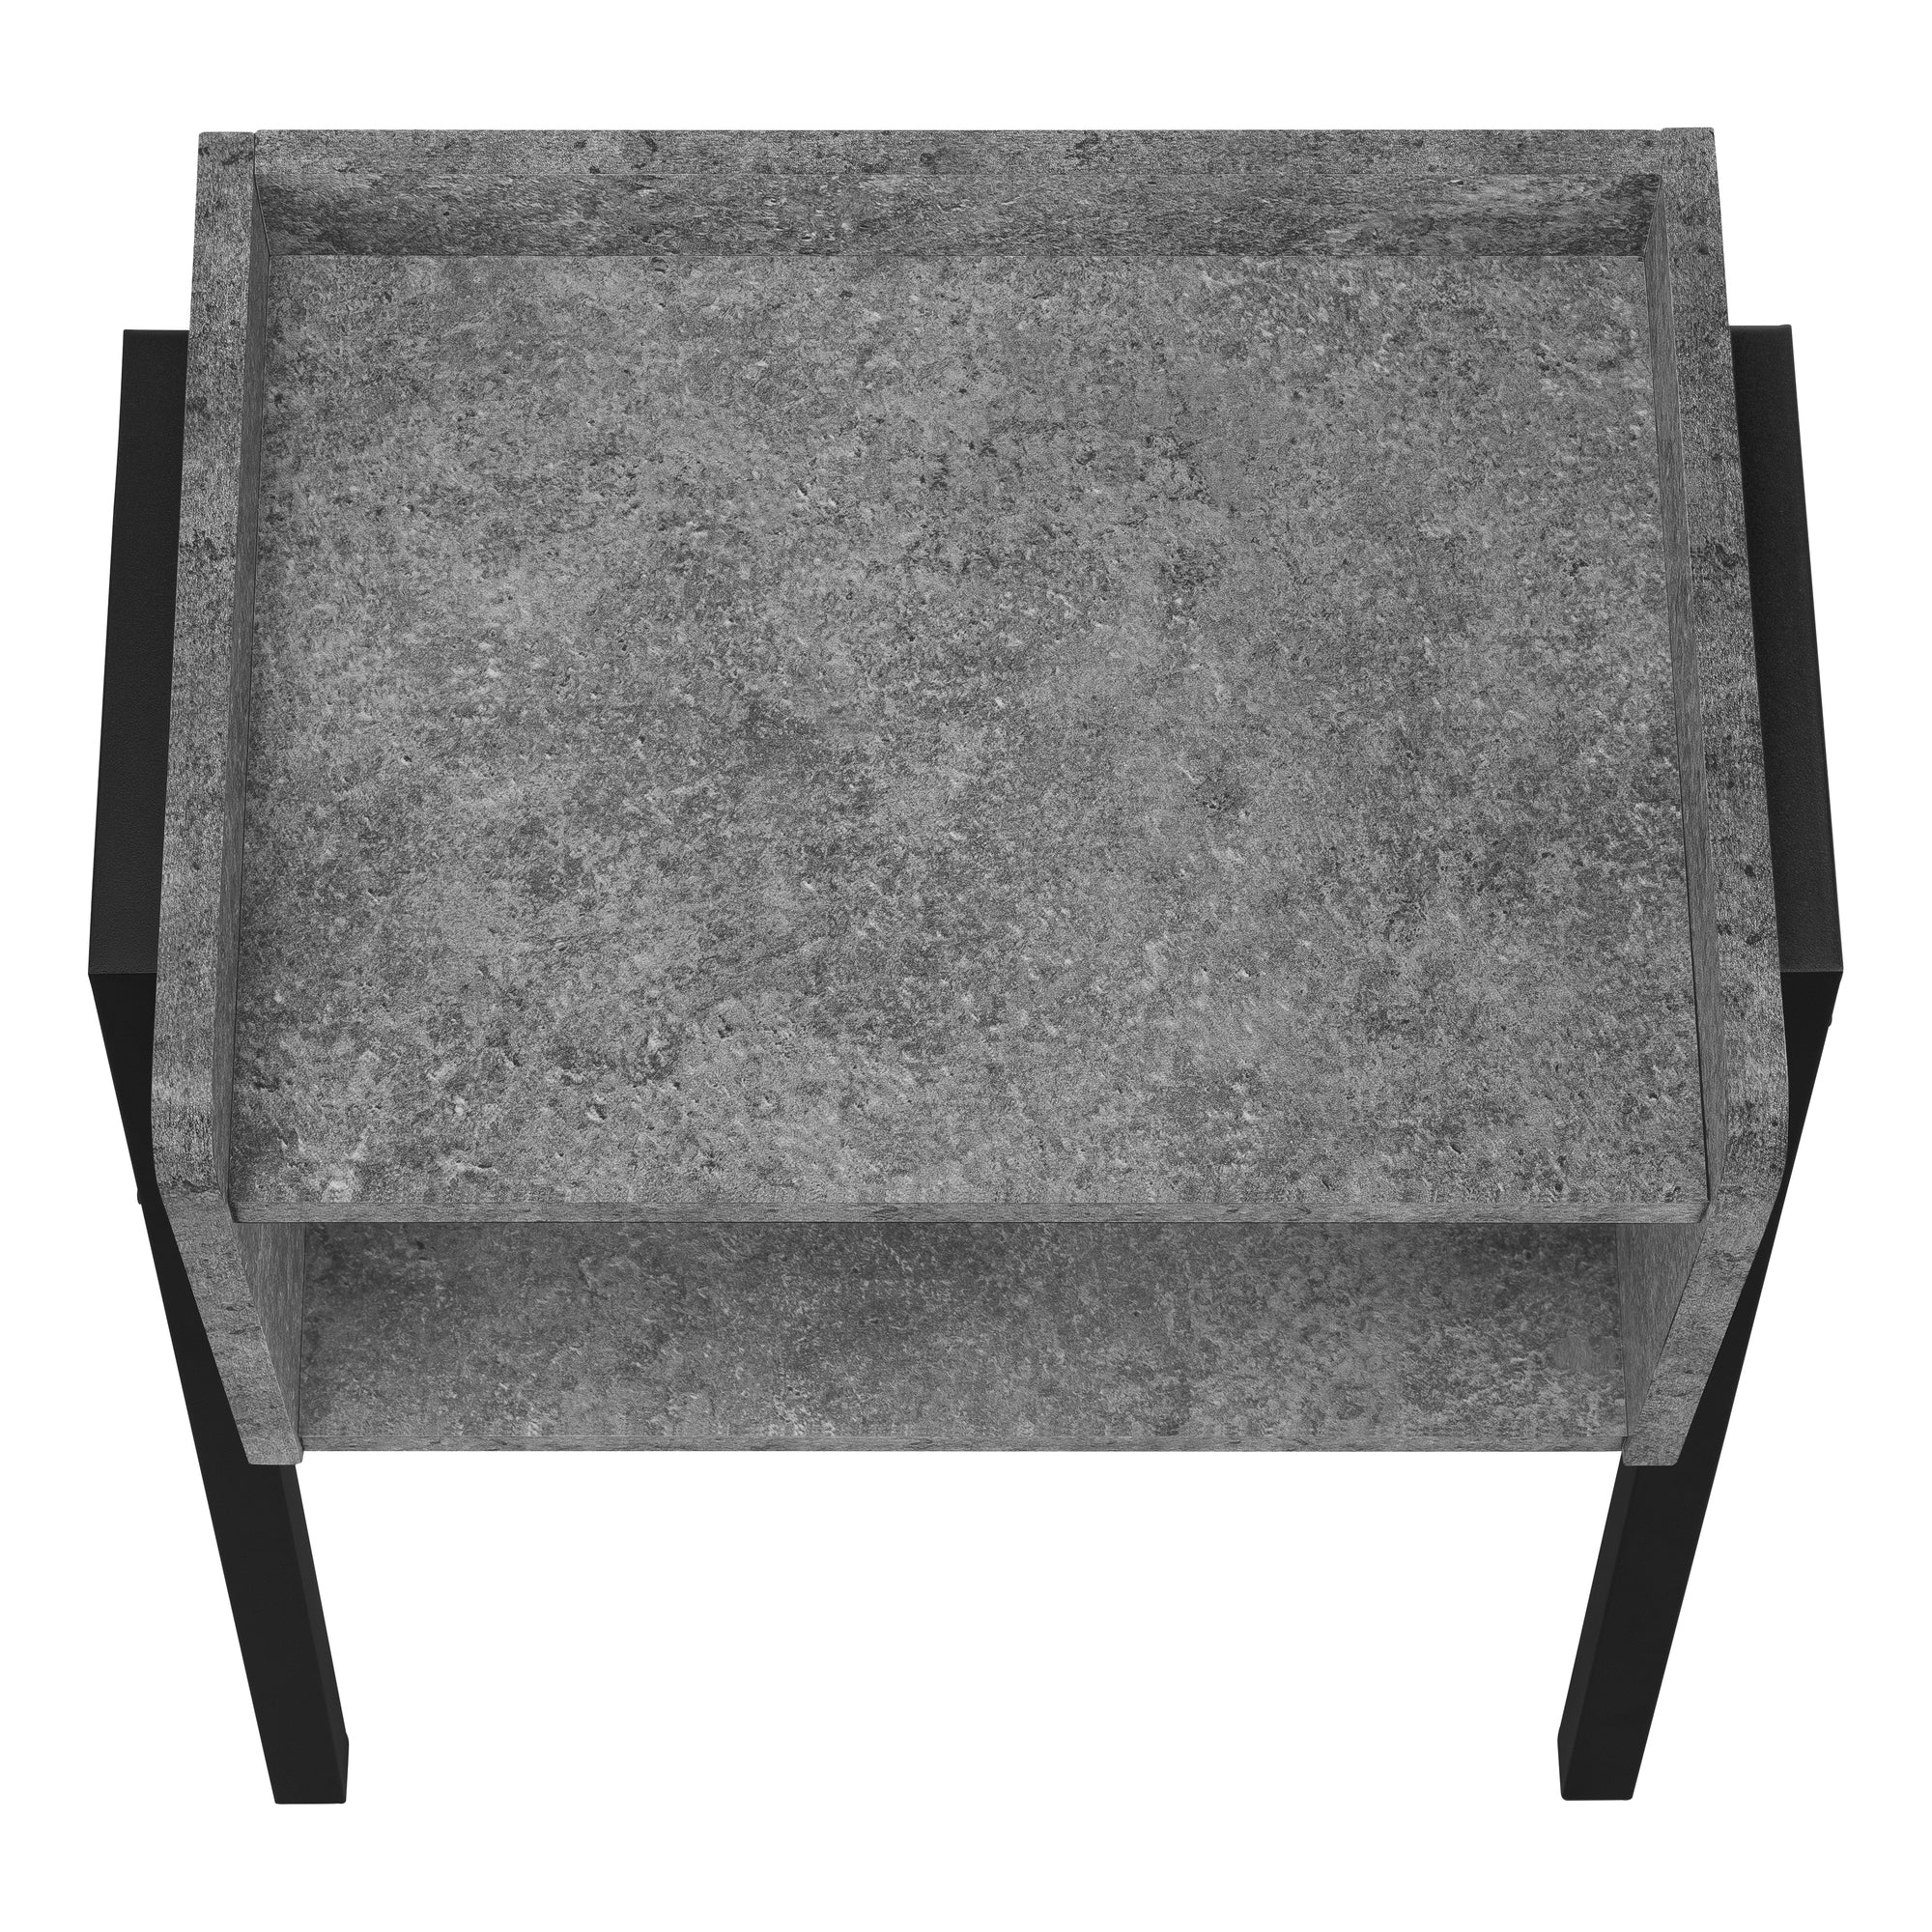 MN-473584    Accent Table, Side, End, Nightstand, Lamp, Living Room, Bedroom, Metal Legs, Laminate, Grey Stone Look, Black, Contemporary, Modern